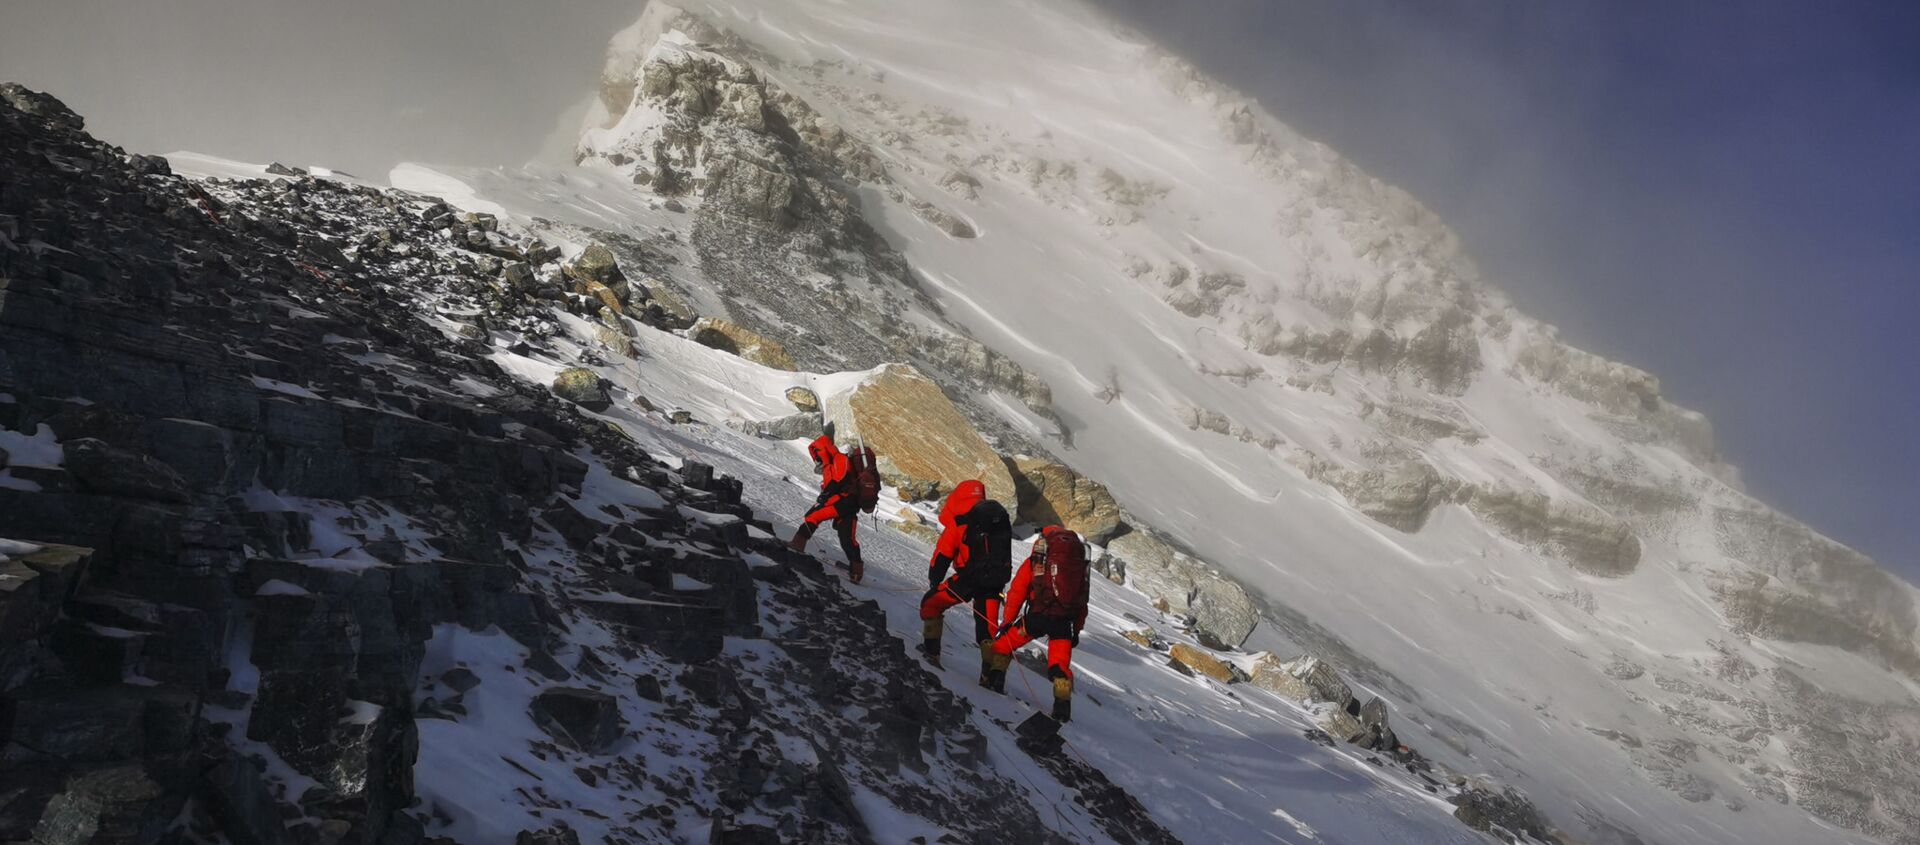 In this photo released by Xinhua News Agency, members of a Chinese surveying team head for the summit of Mount Everest, also known locally as Mt. Qomolangma, Wednesday, May 27, 2020. The Chinese government-backed team plans to summit Mount Everest this week at a time when the world's tallest peak has been closed to commercial climbers.  - Sputnik International, 1920, 22.01.2021